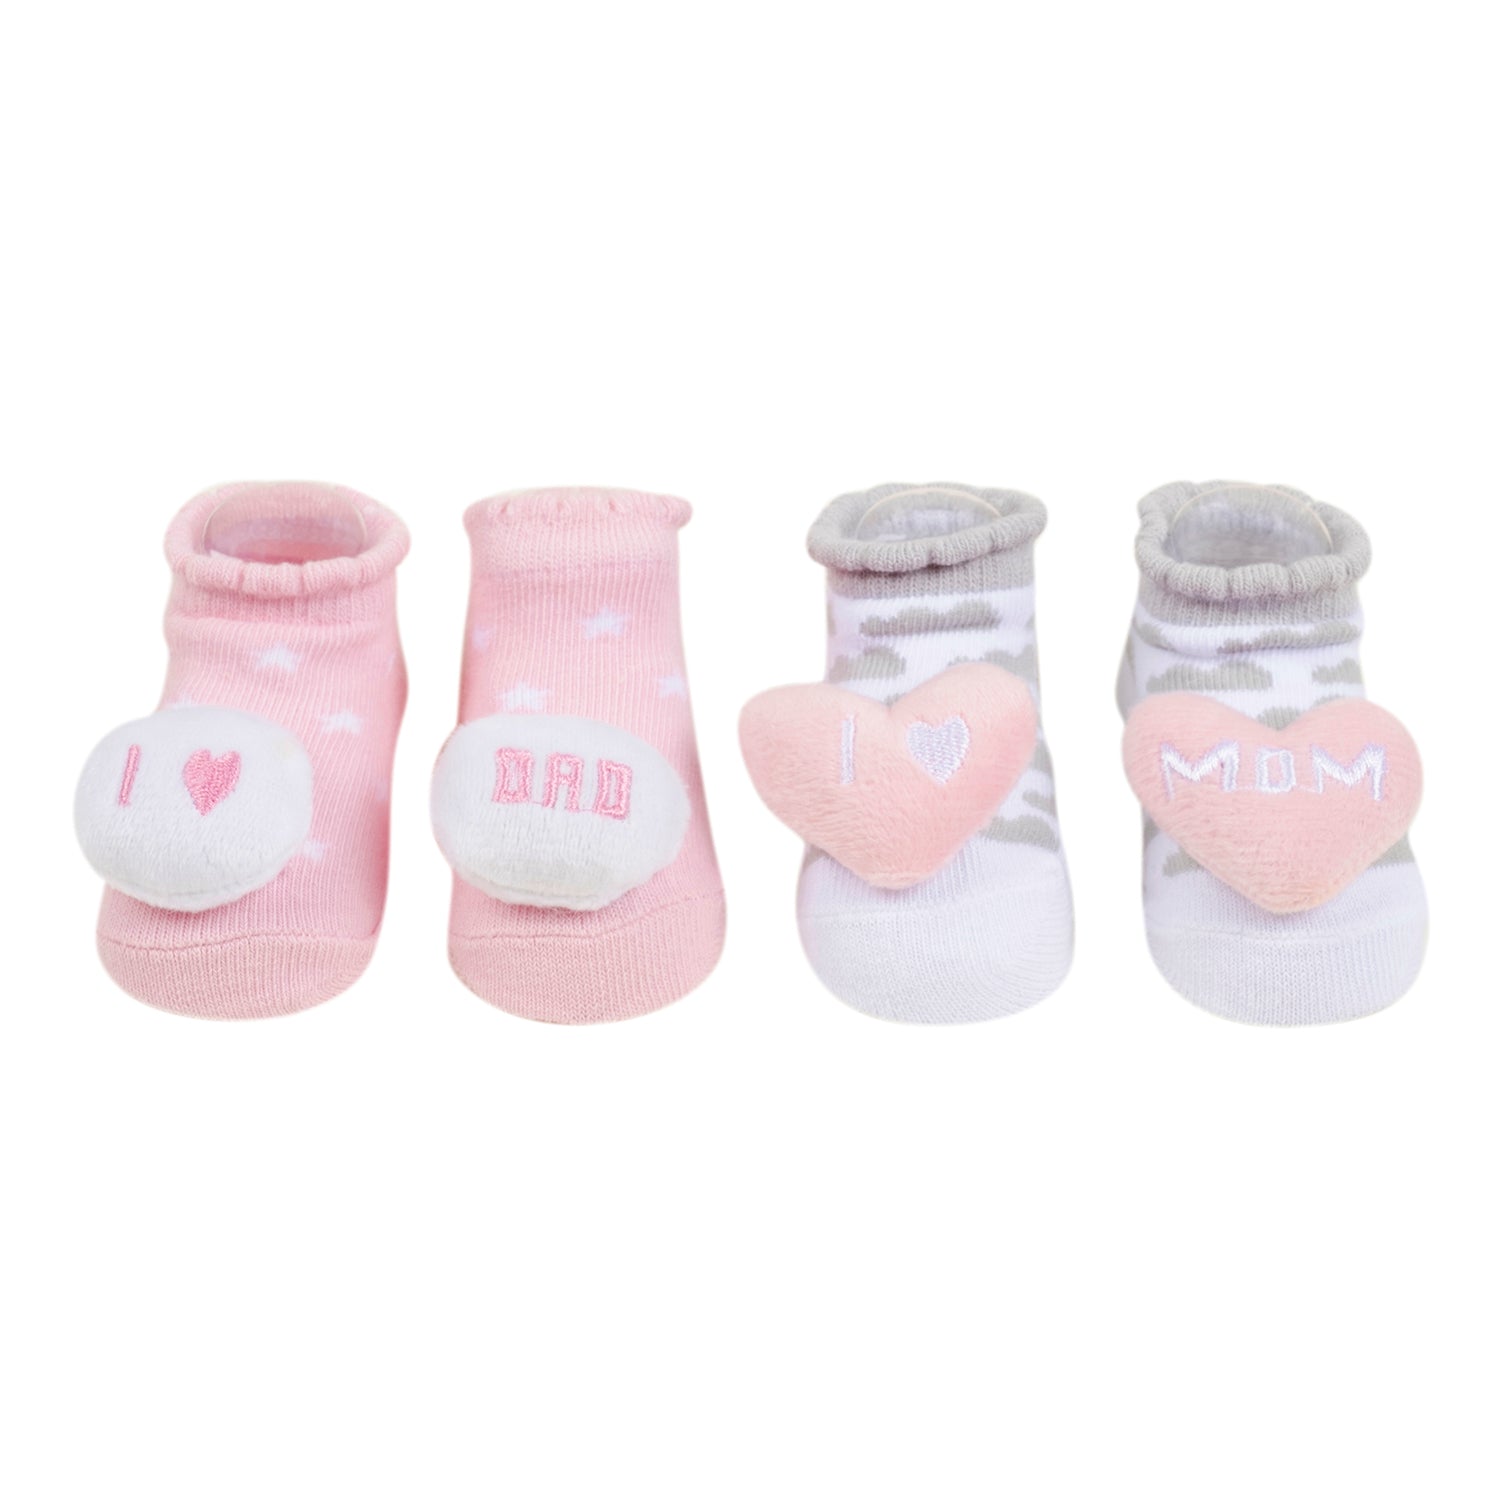 Baby Moo Mom Dad's Heart Cotton 3D Ankle Length Fancy Infant Gift Set of 2 Socks Booties - Pink, Grey